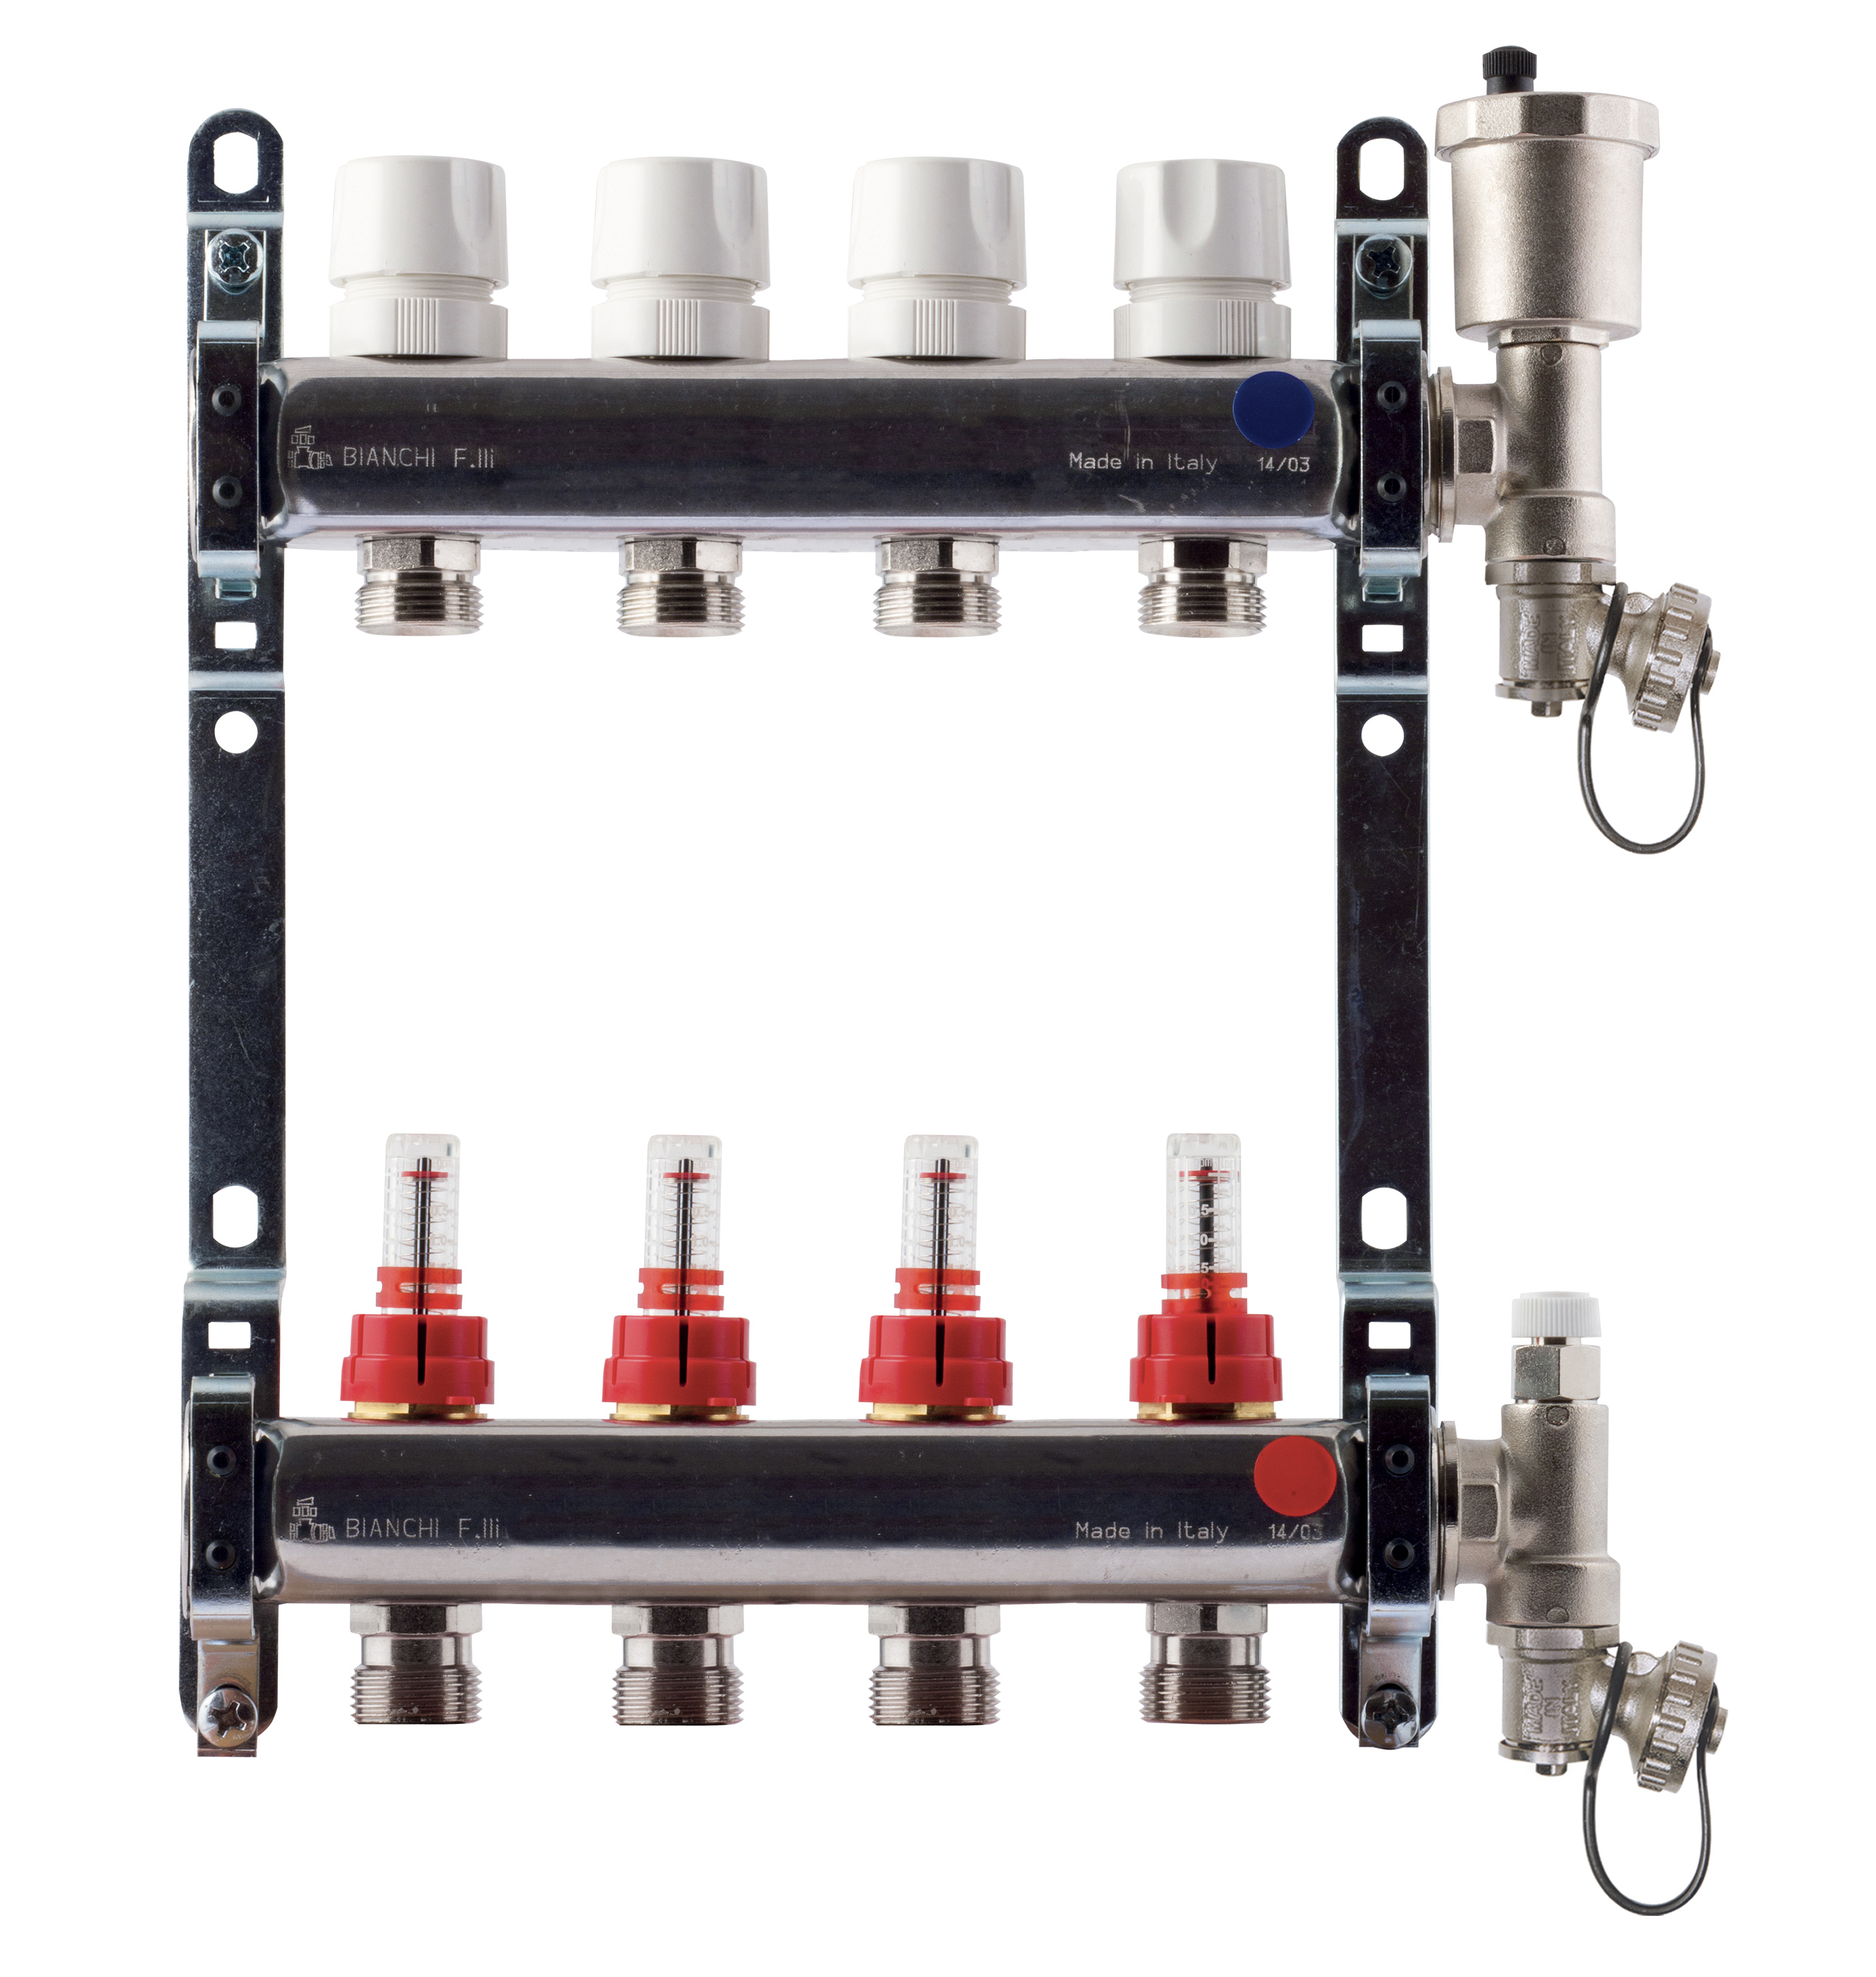 FF manifolds therm. valves and flowmeters and discharge